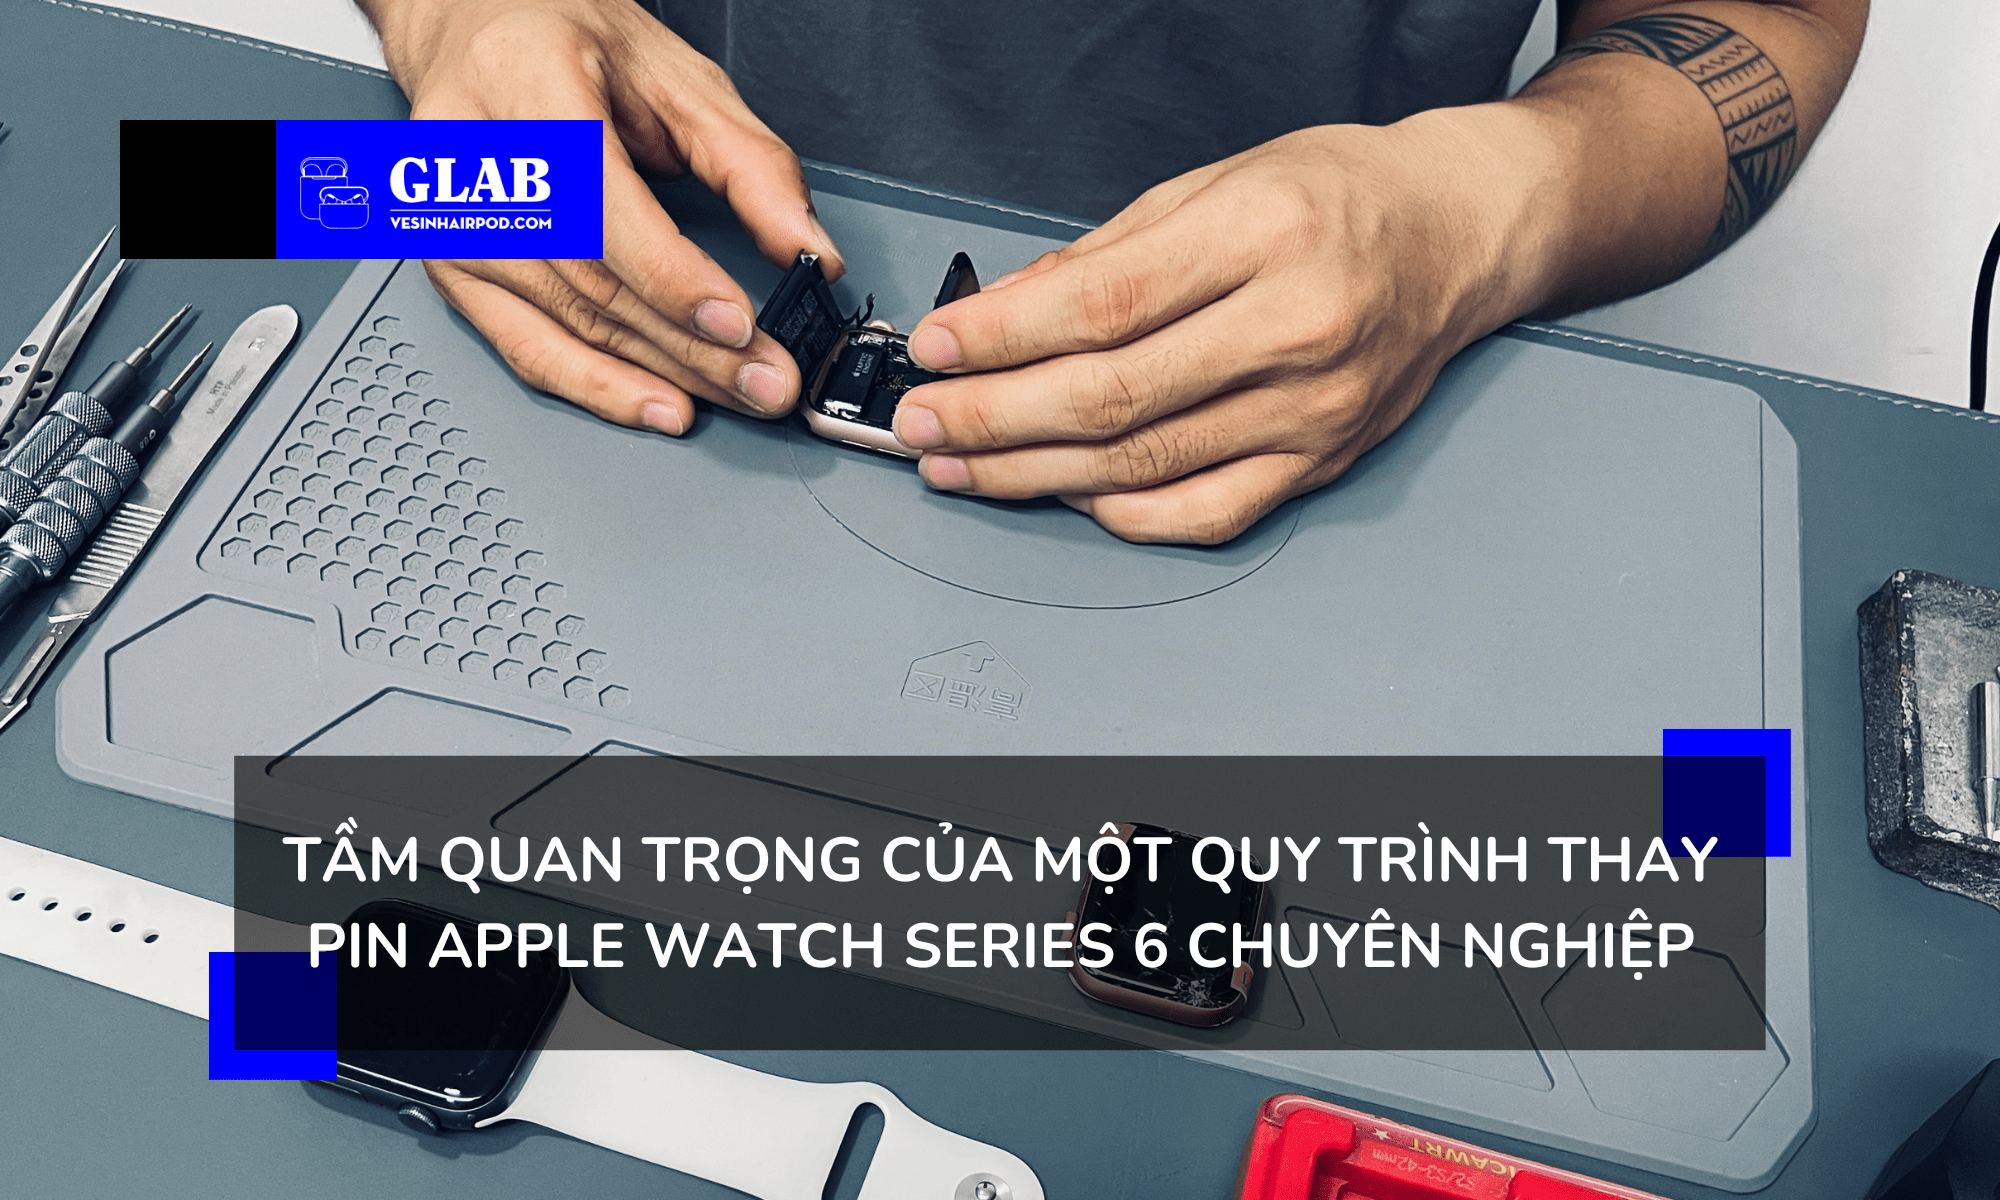 quy-trinh-thay-pin-apple-watch-series-6